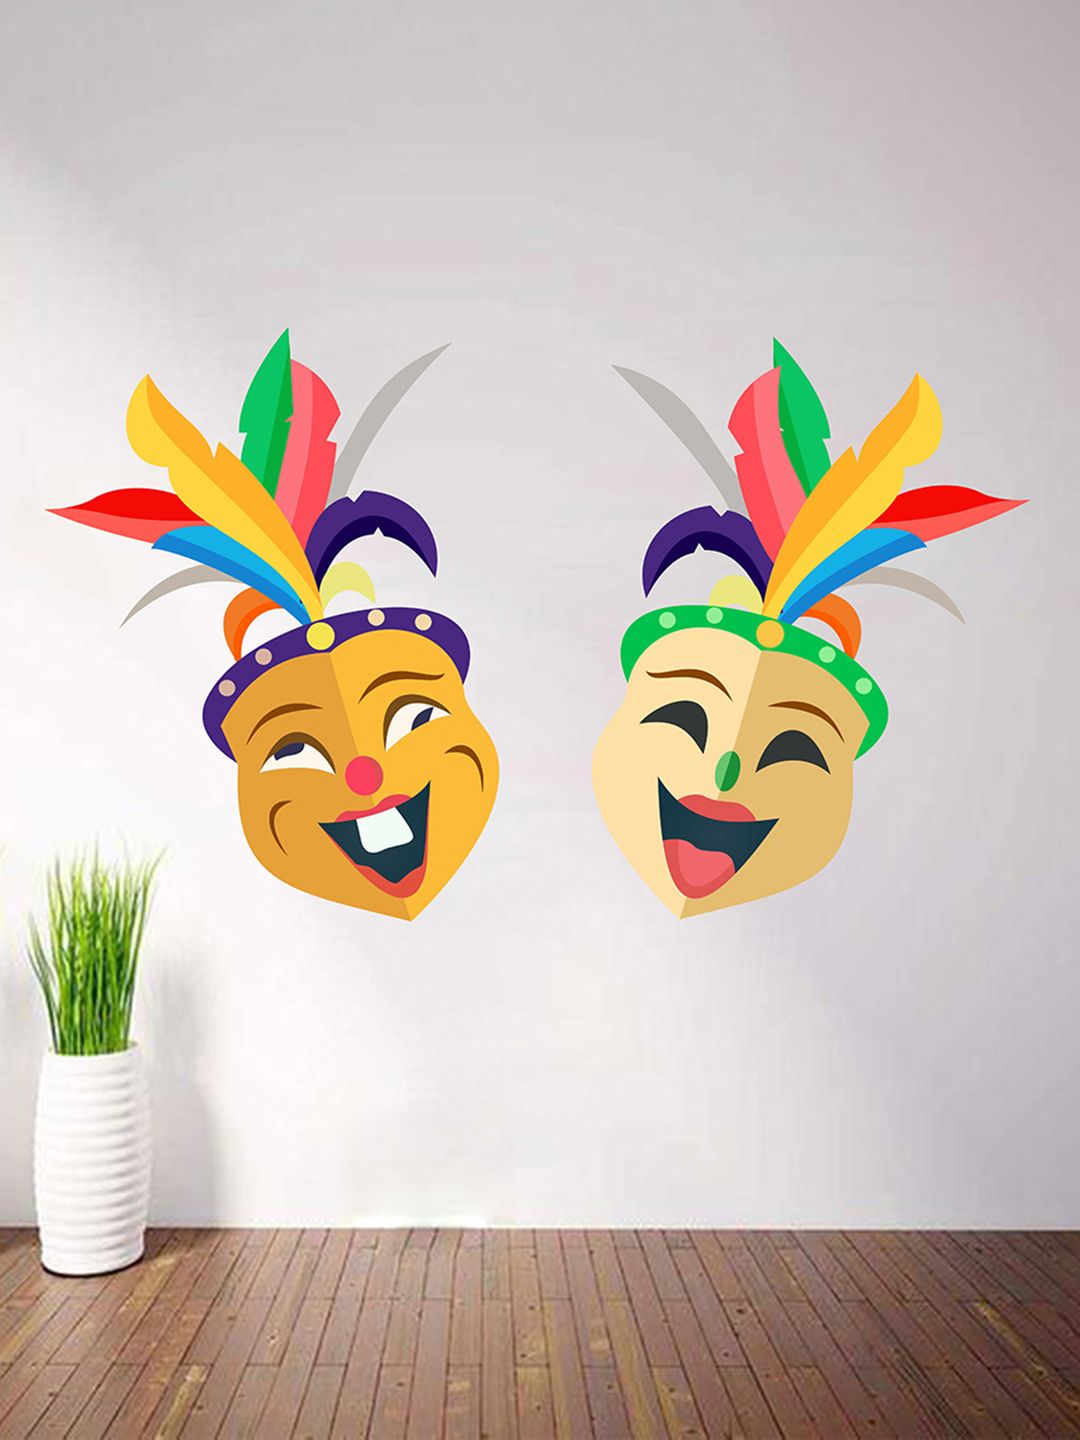 WALLSTICK Brown & Beige Decals and Stickers Price in India